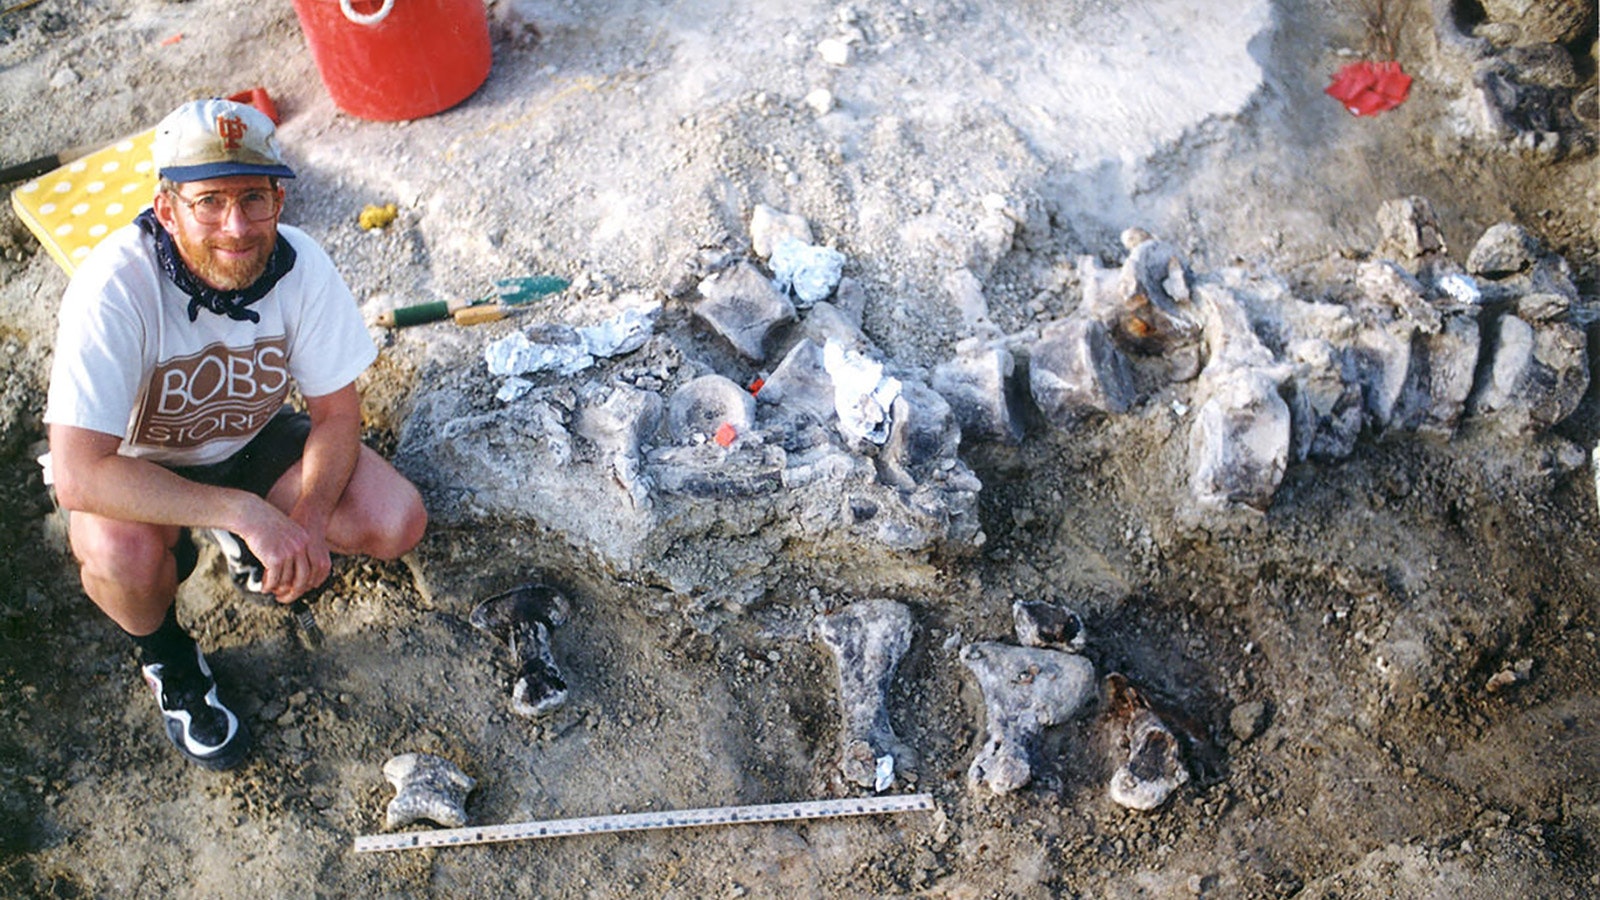 In 1998 an expedition crew from the University of Kansas discovered a large fossilized brachiosaur foot in the Black Hills region of Wyoming Courtesy of KUVP archives